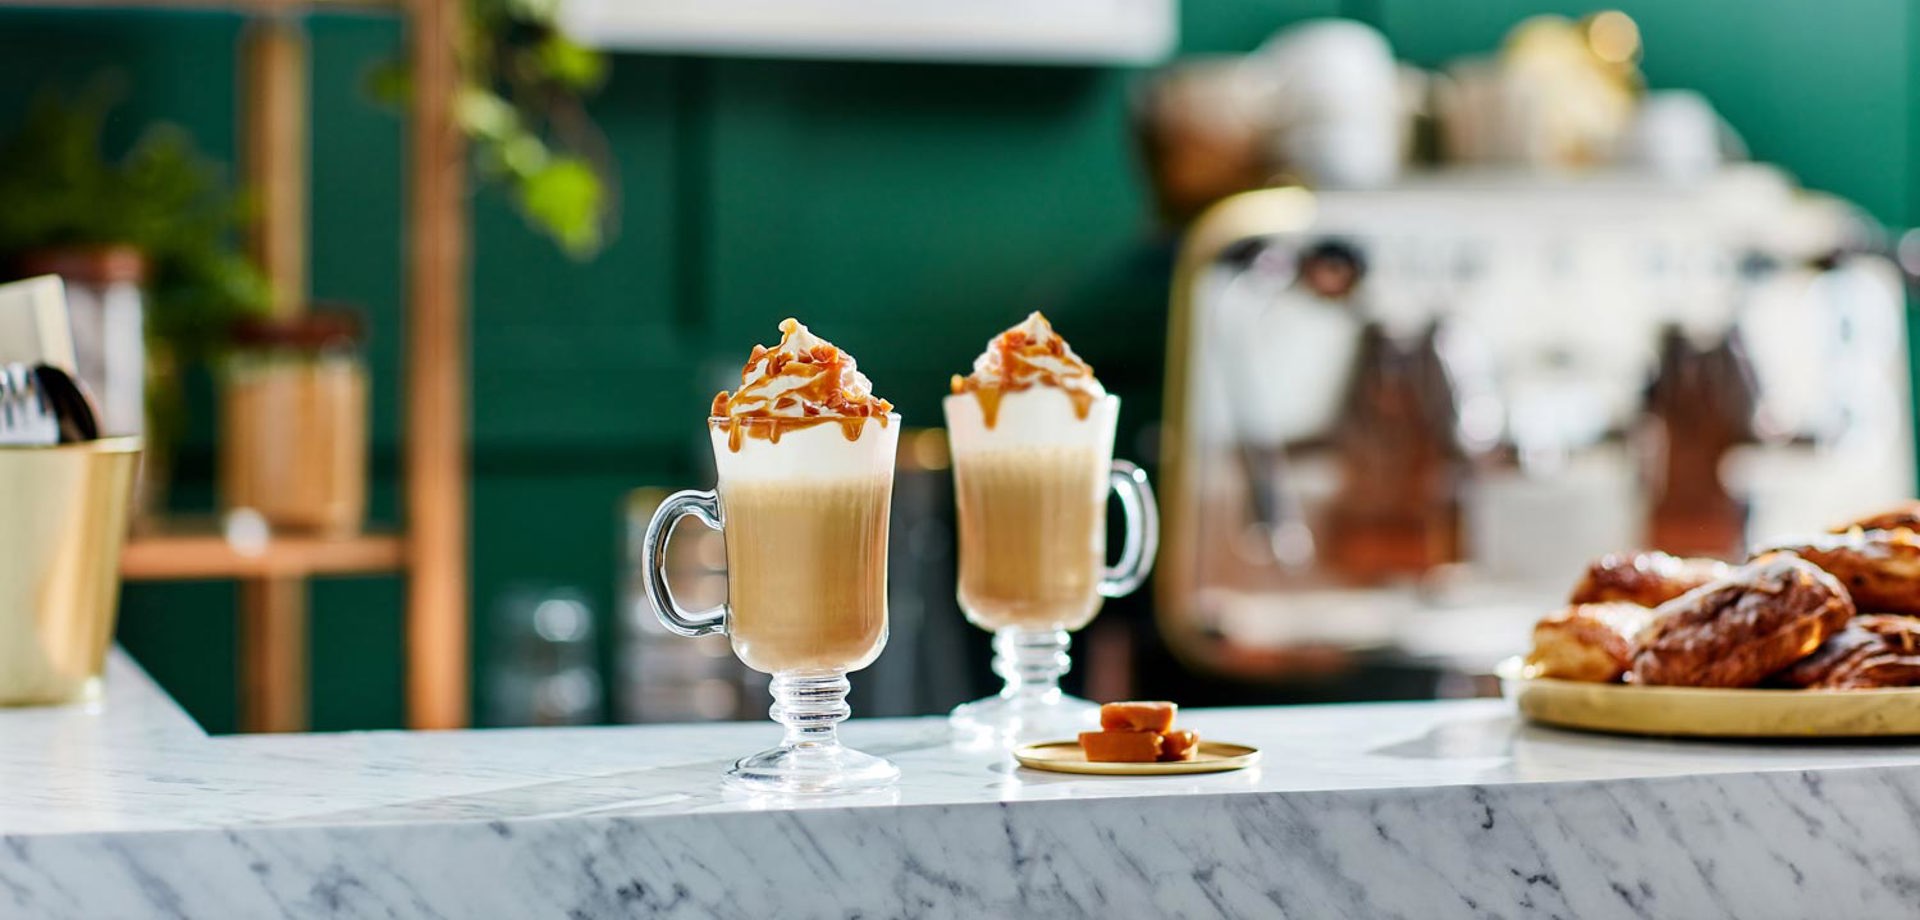 Two lattes sit atop a white marble surface. The lattes are topped with cream and caramel syrup. In the background there are pastries and a large coffee machine.